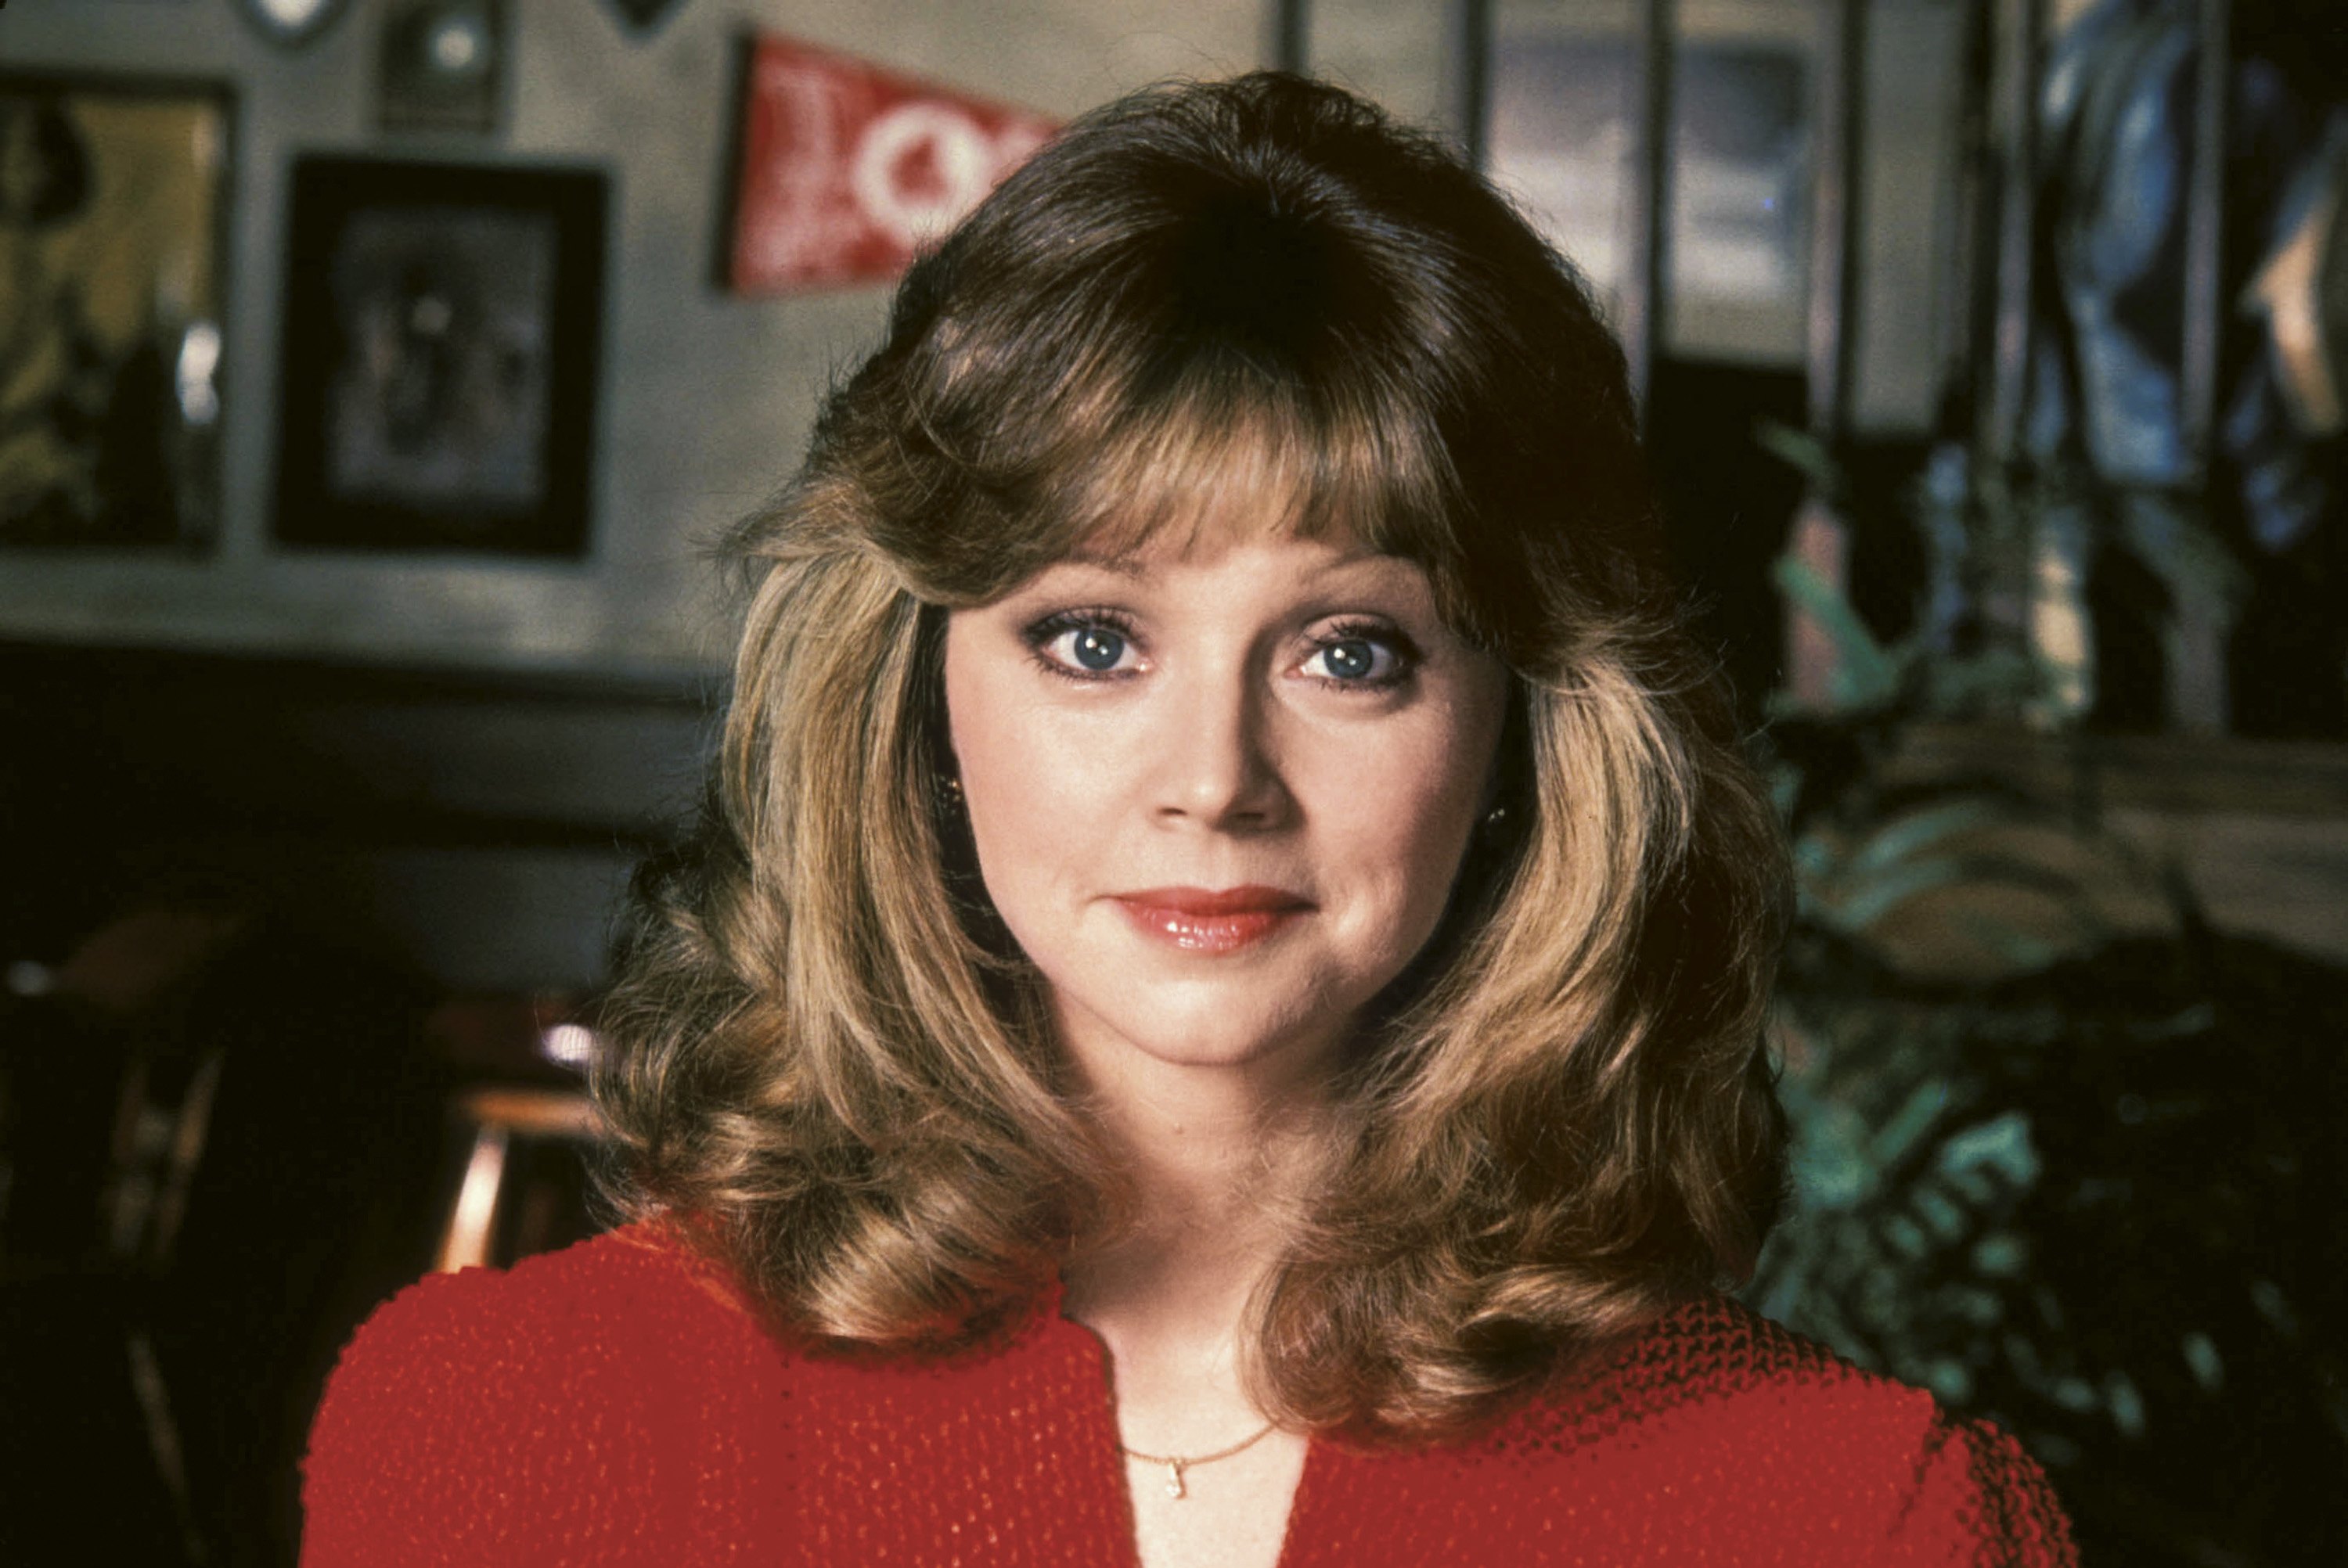 Shelley Long photographed for "Cheers" in the 1980's | Source: Getty Images